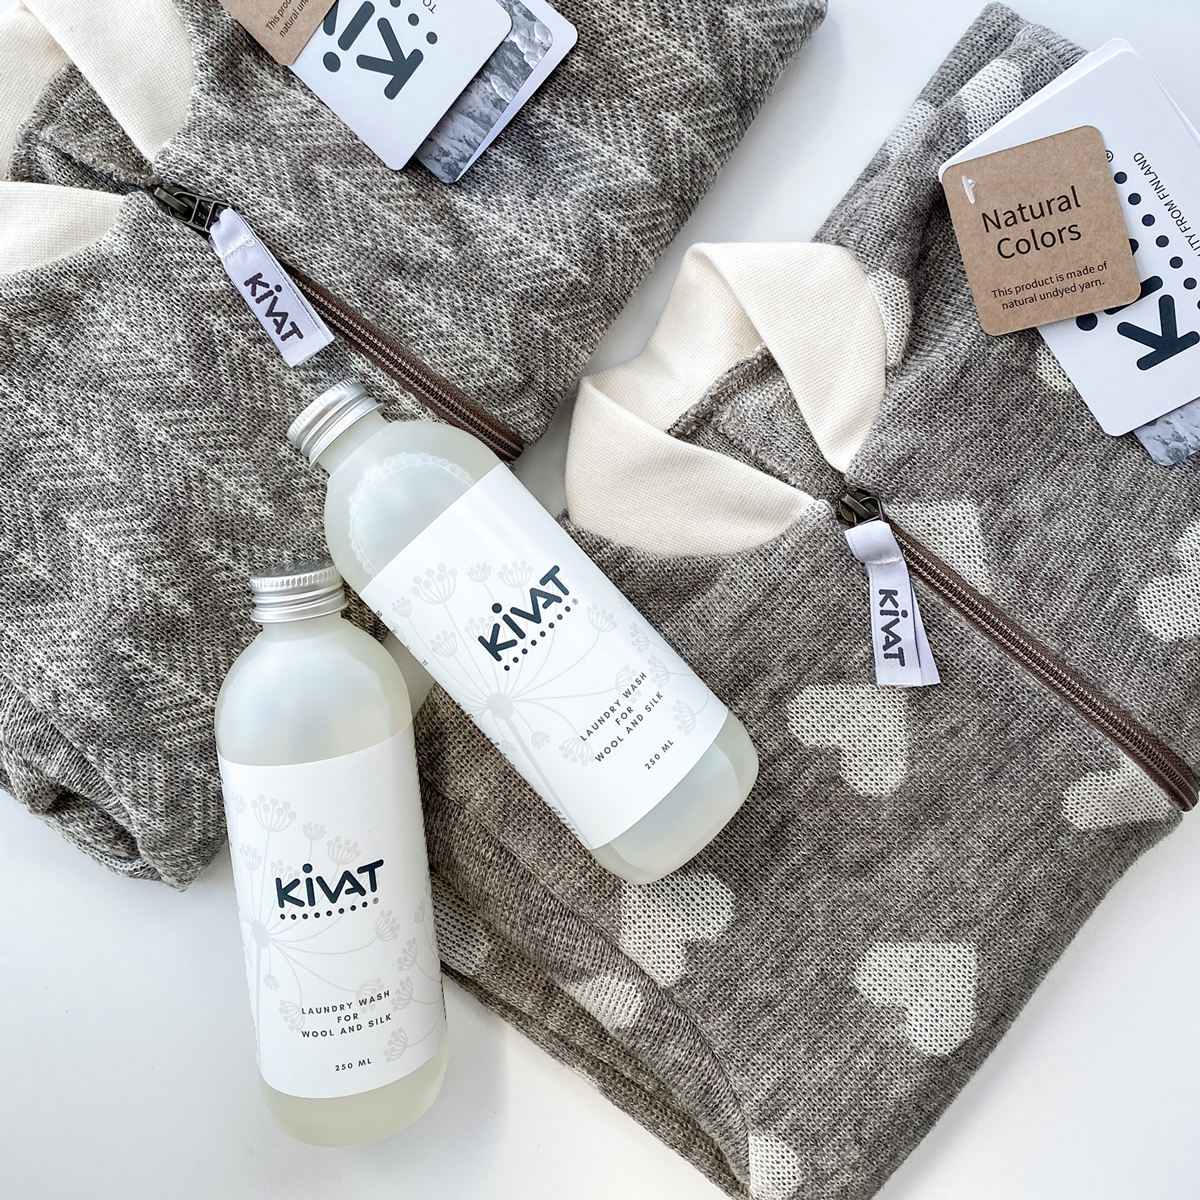 KIVAT laundry wash for wool and silk